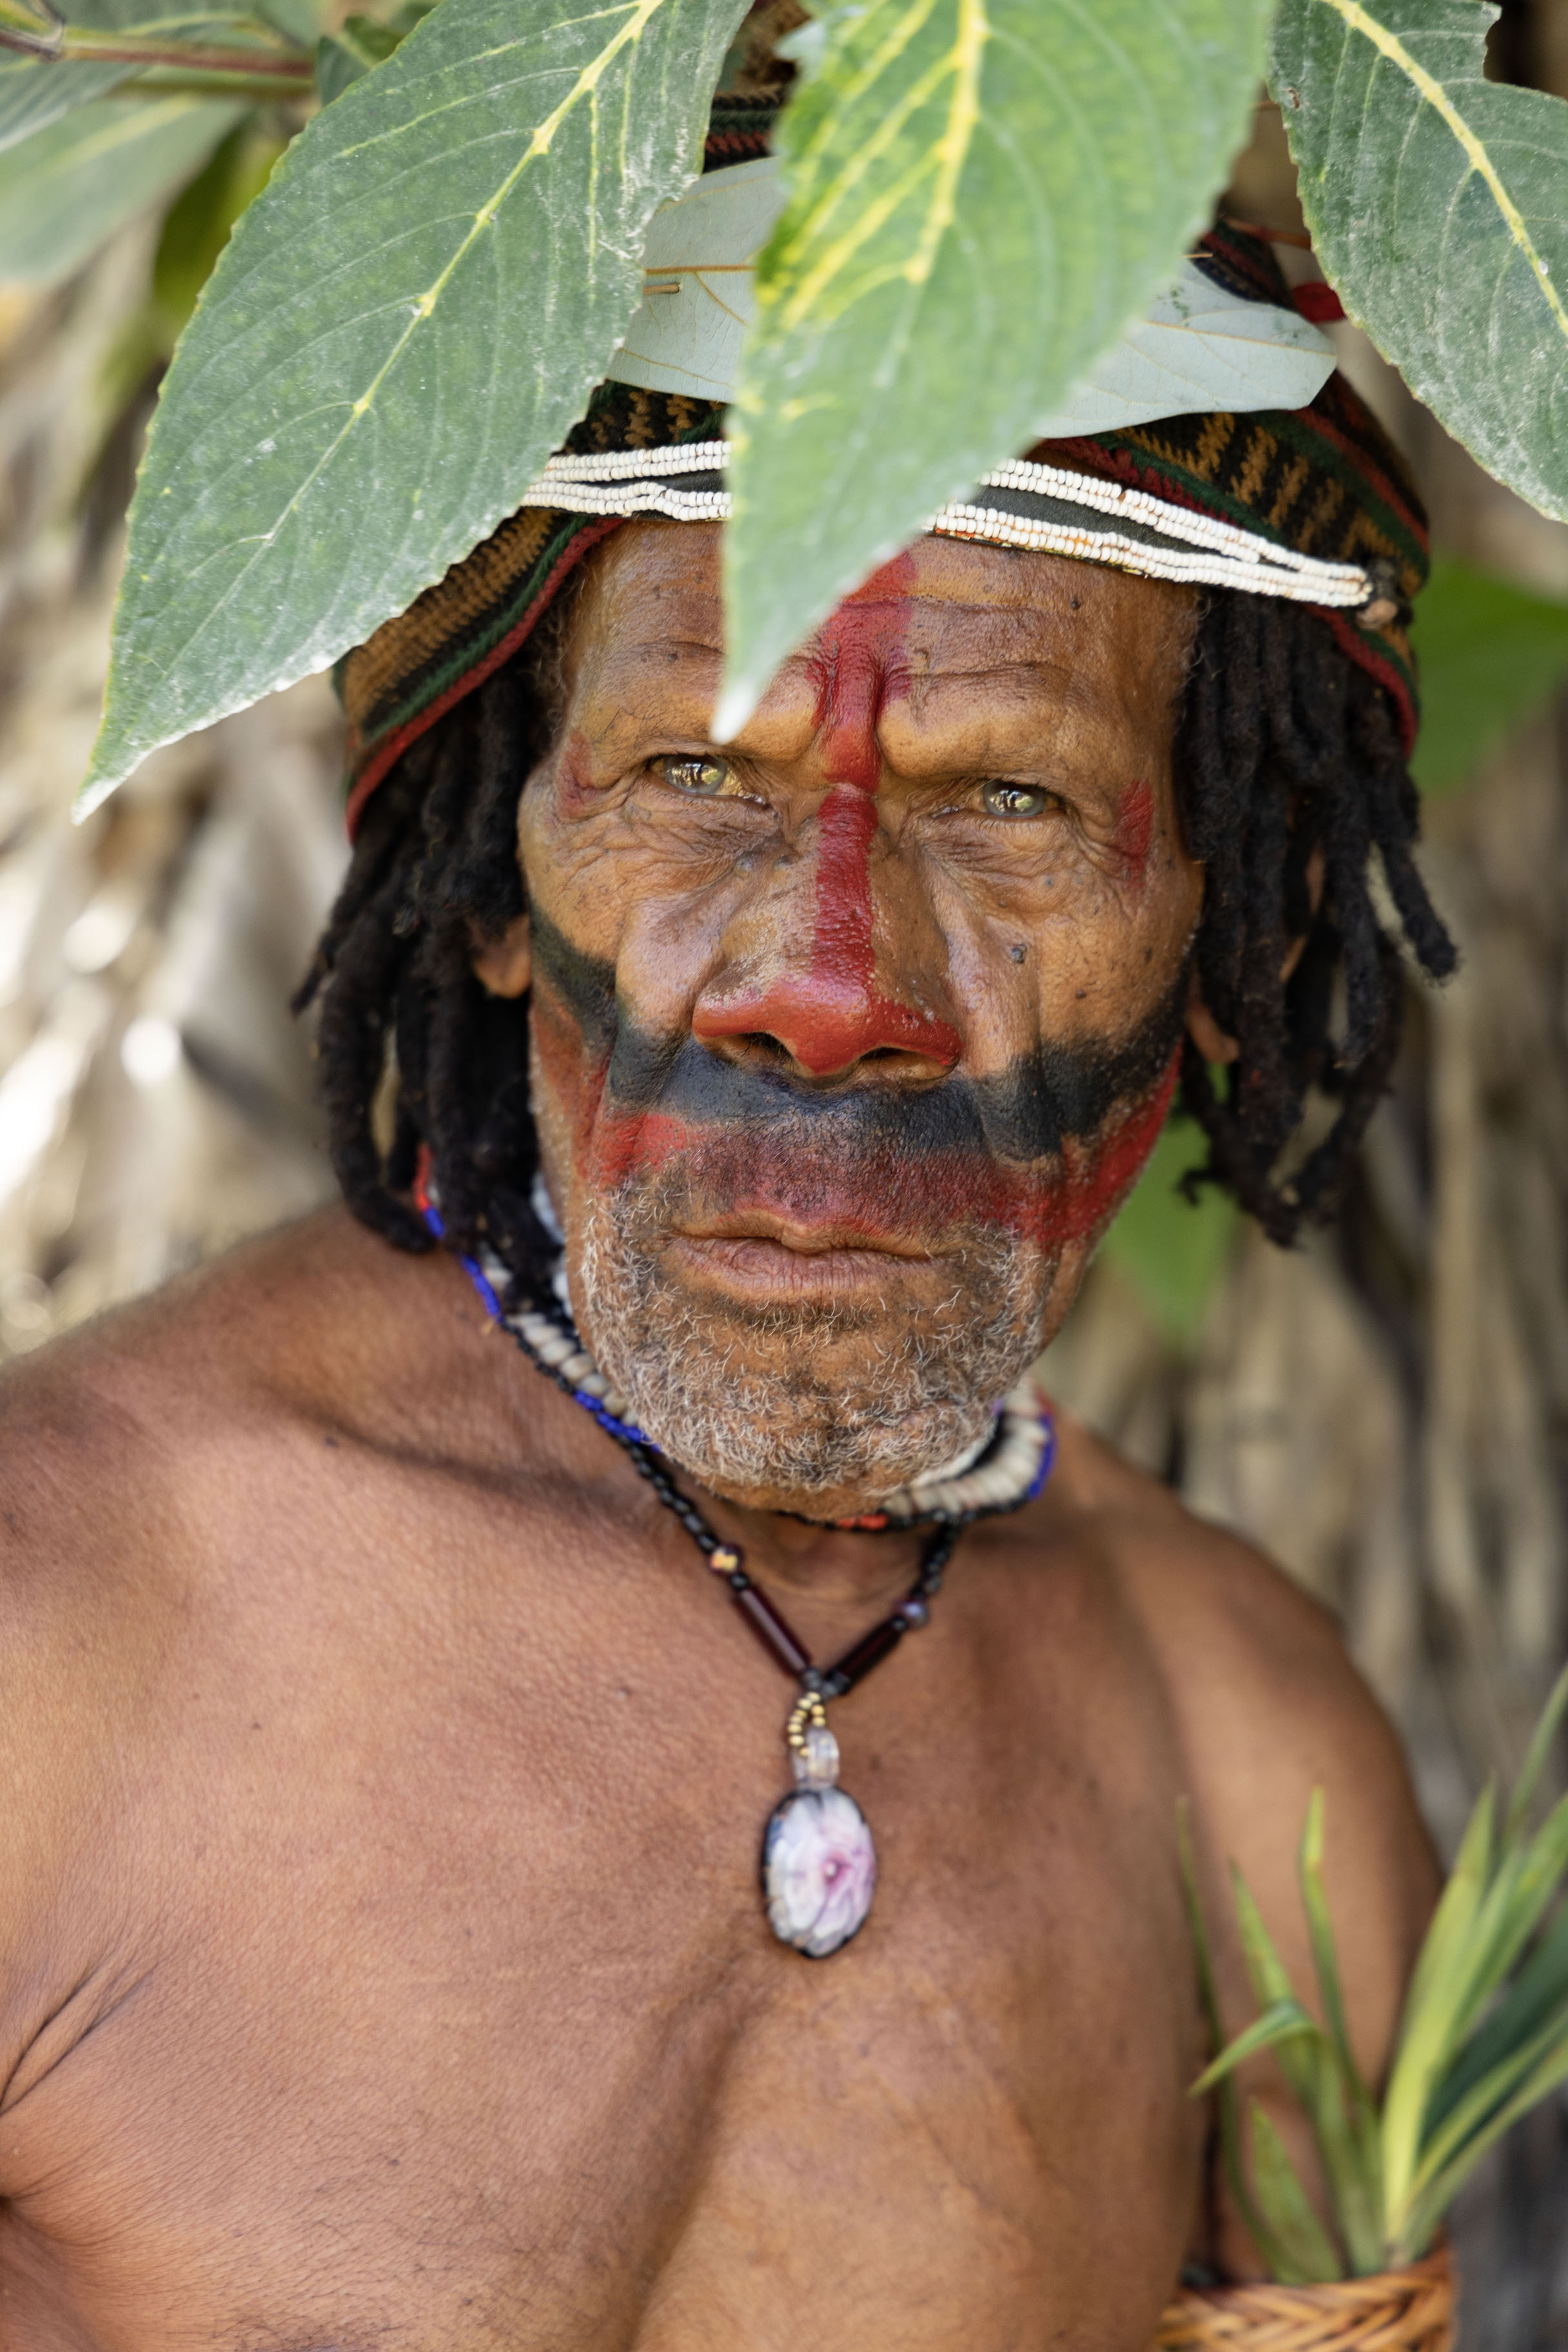 One of the Huli Wigmen with a differently painted face | Huli Wigmen | Papua New Guinea